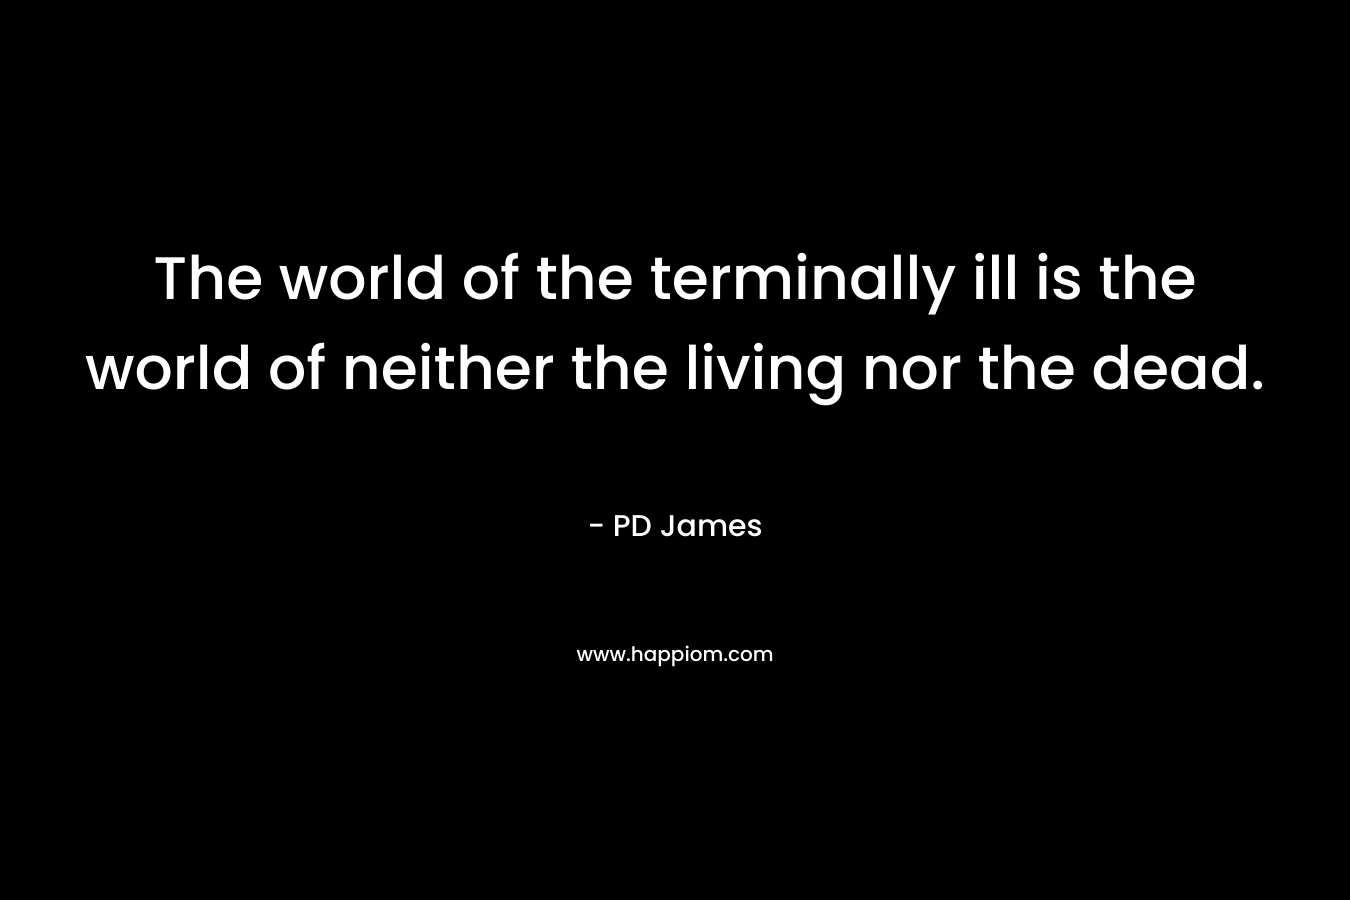 The world of the terminally ill is the world of neither the living nor the dead. – PD James